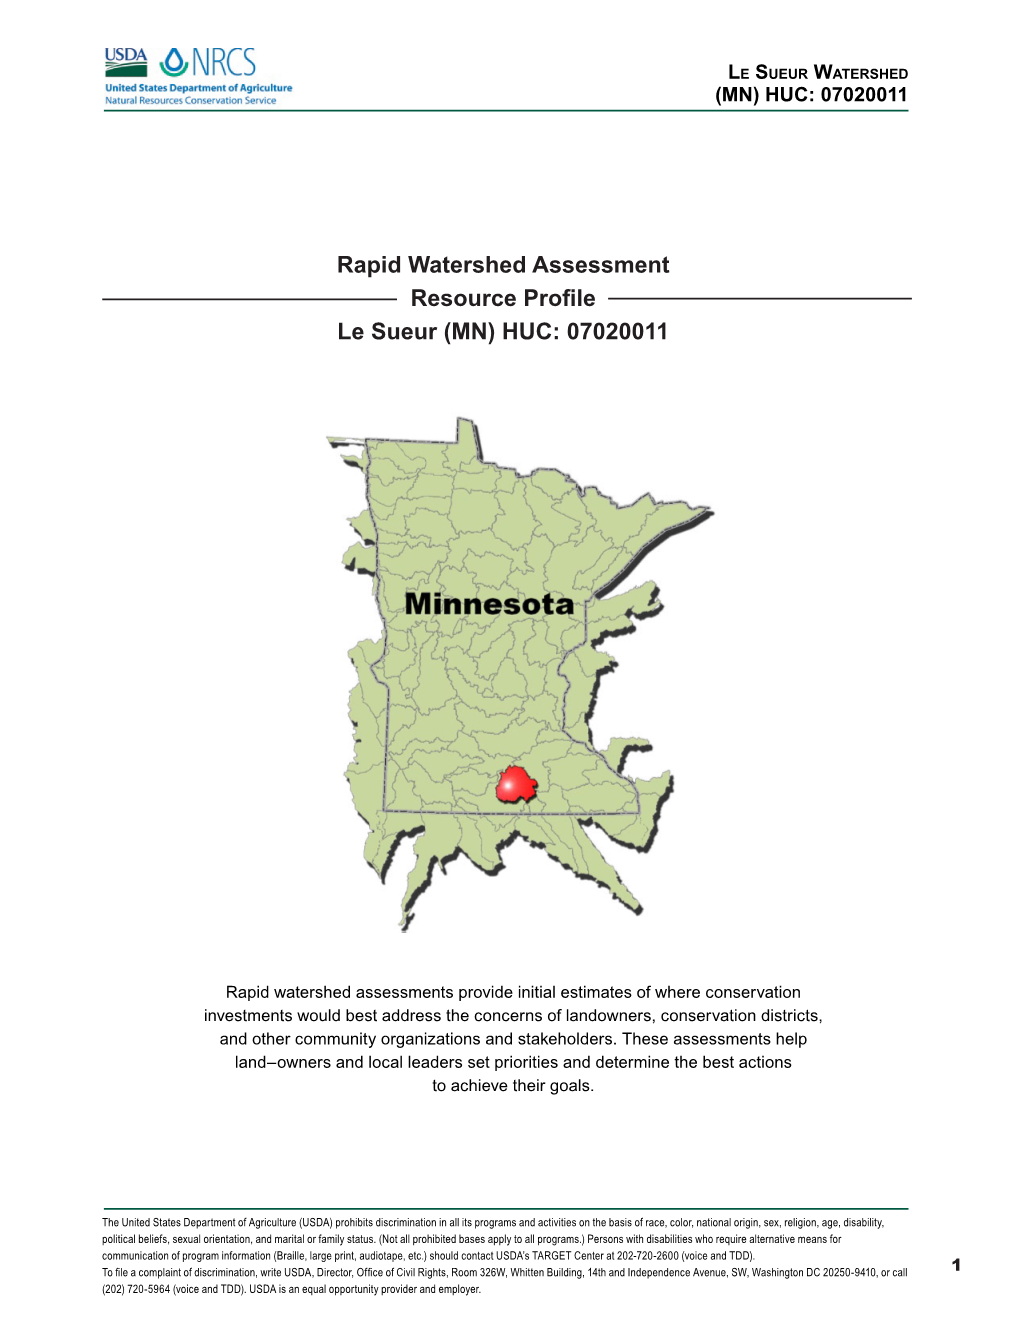 Rapid Watershed Assessment Resource Profile Le Sueur (MN) HUC: 07020011